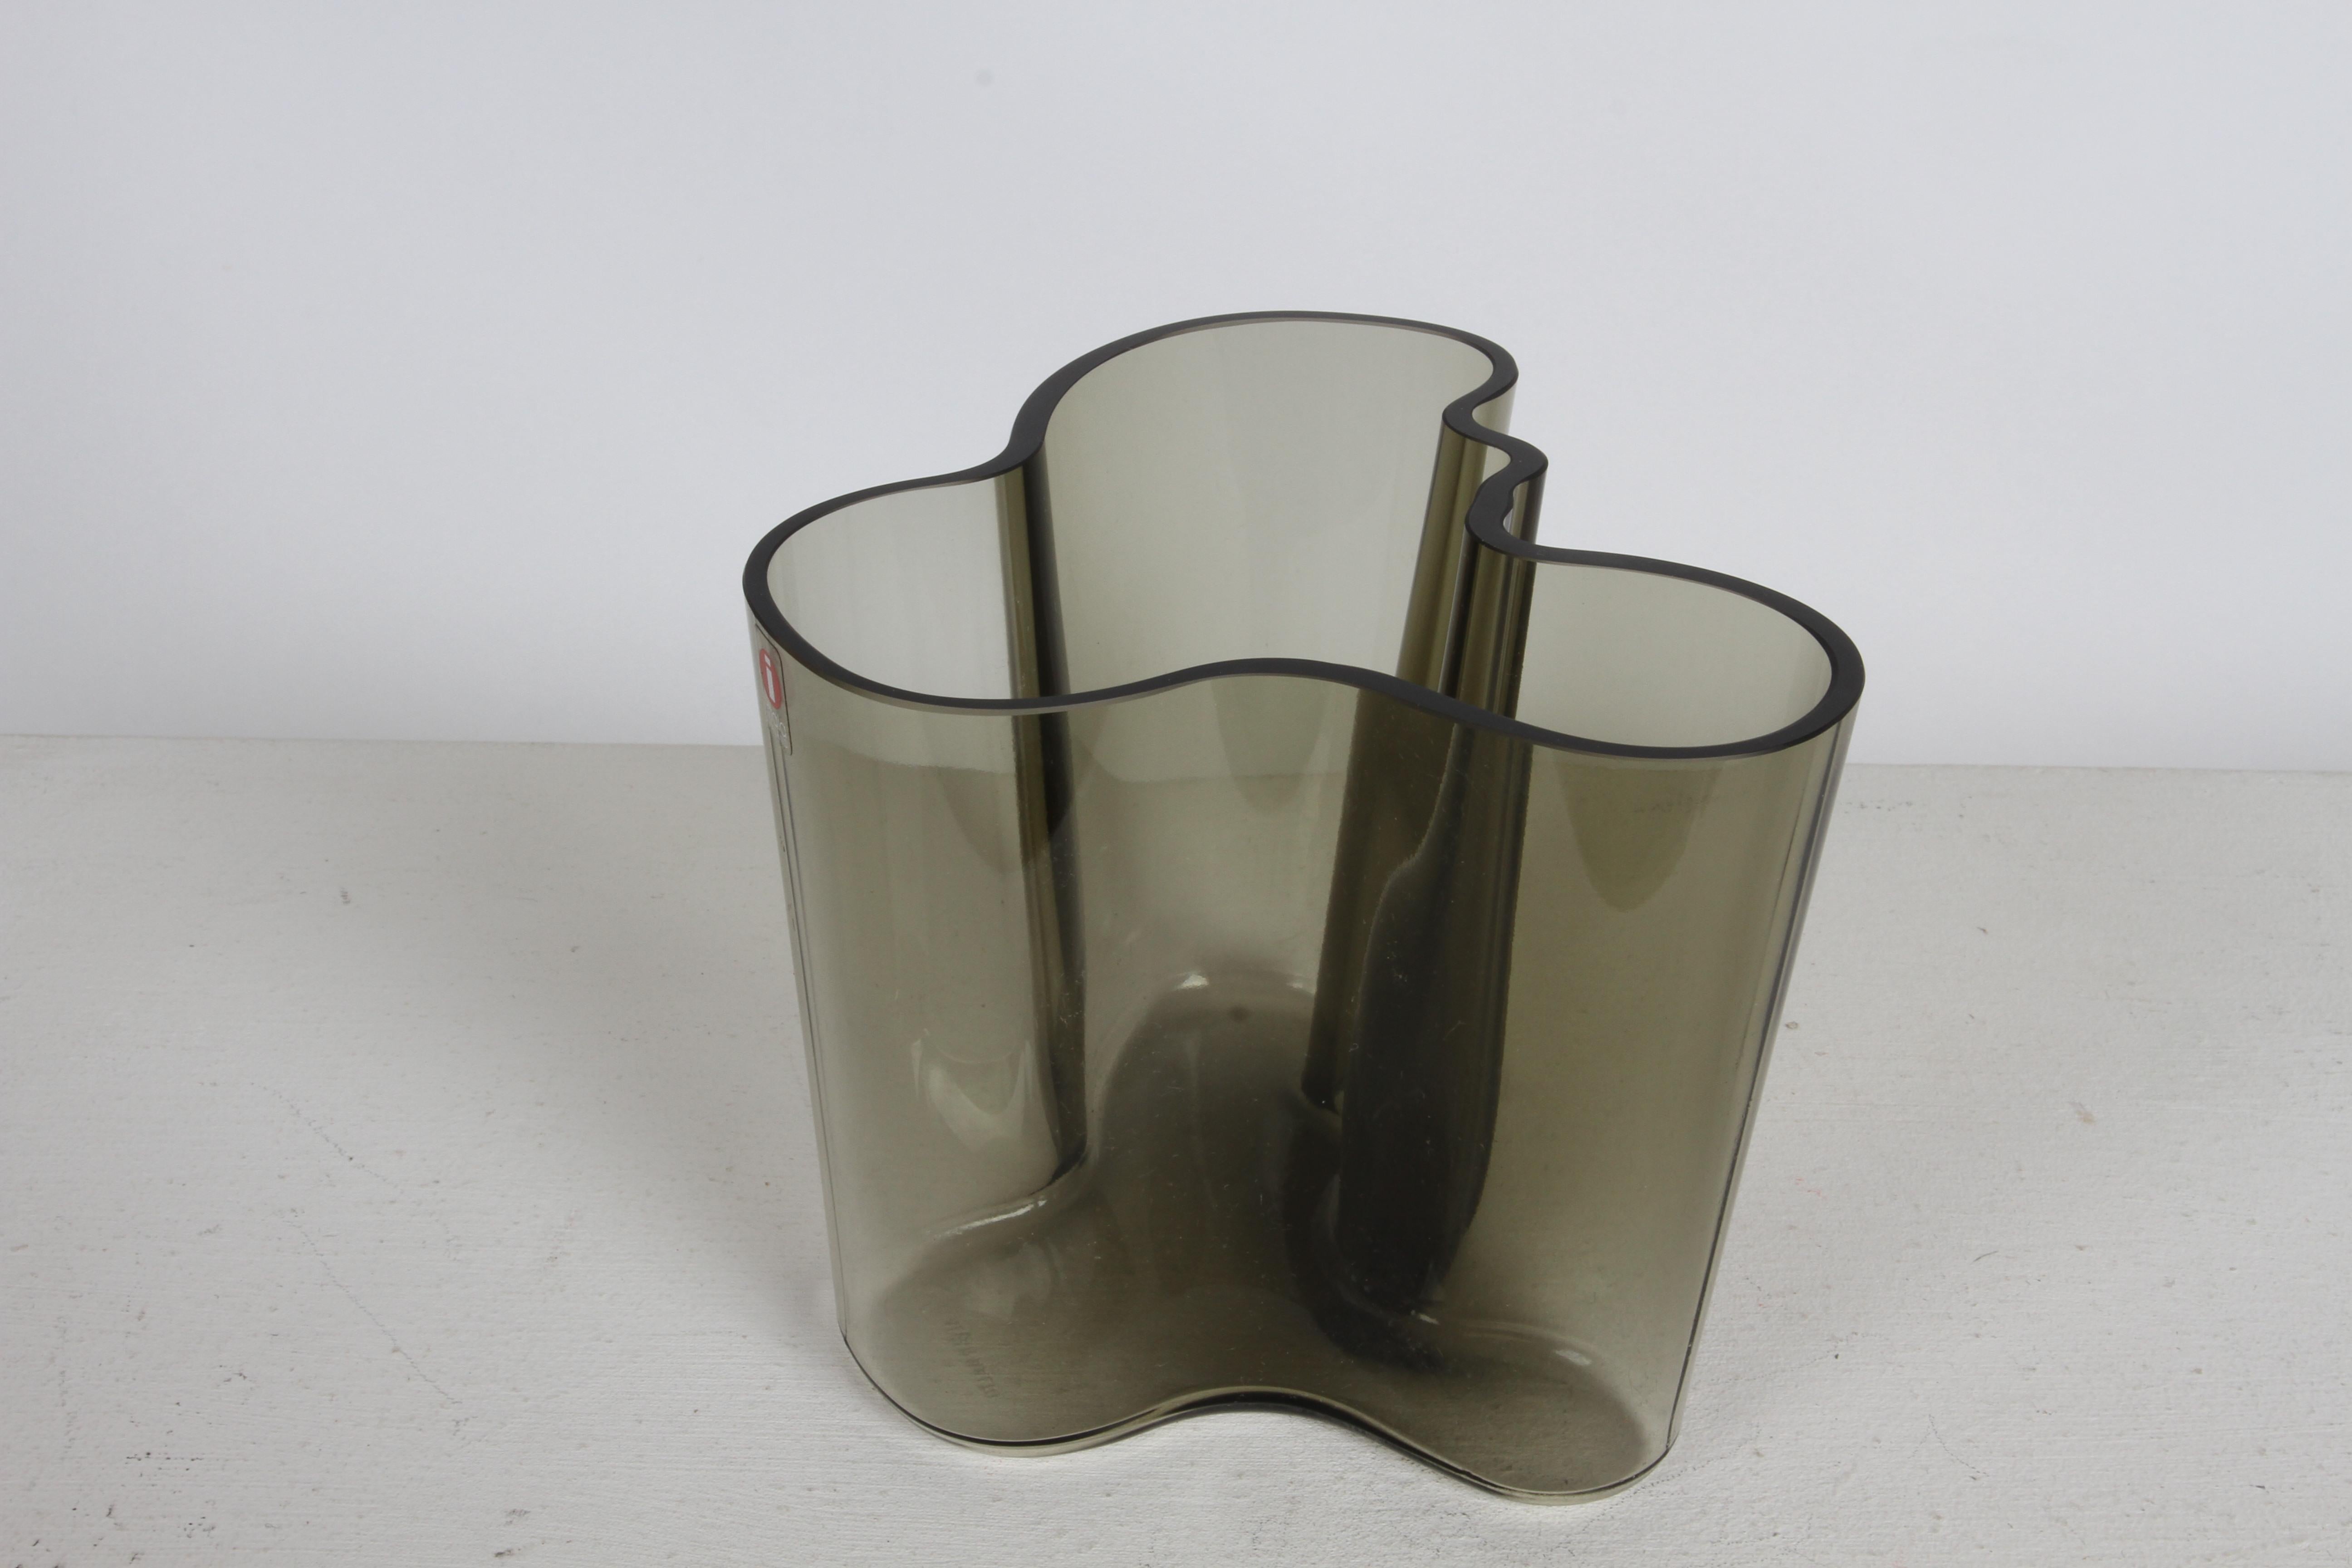 1970s MCM Alvar Aalto Savoy Vase 3030 in Smoke Gray Glass by Iittala Finland In Good Condition For Sale In St. Louis, MO